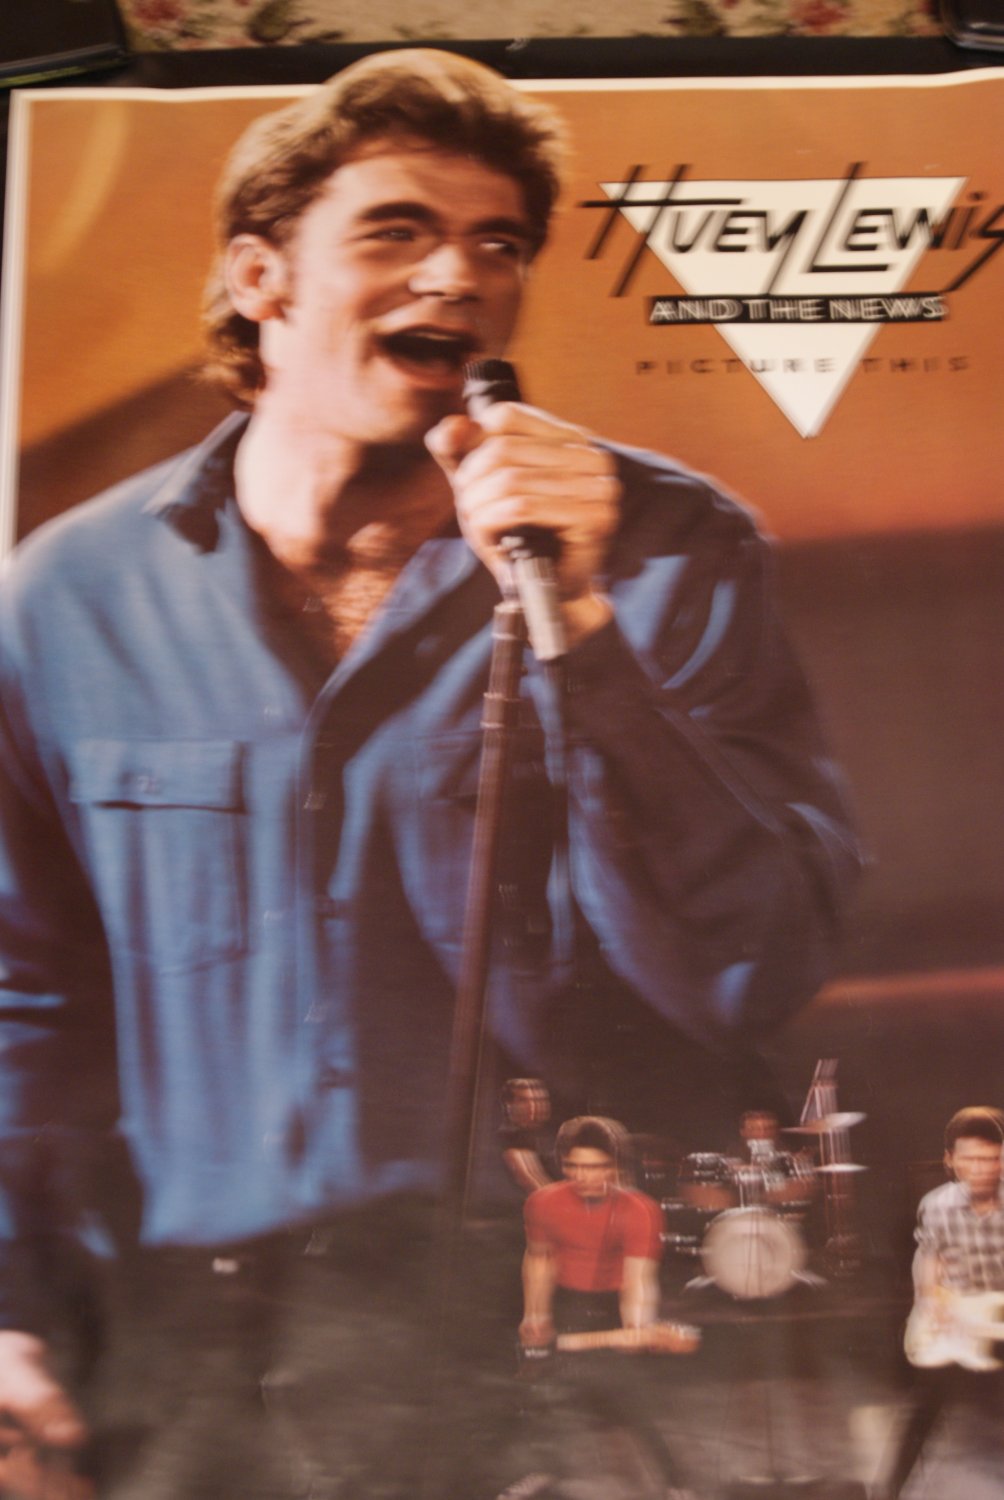 Huey Lewis & the News poster